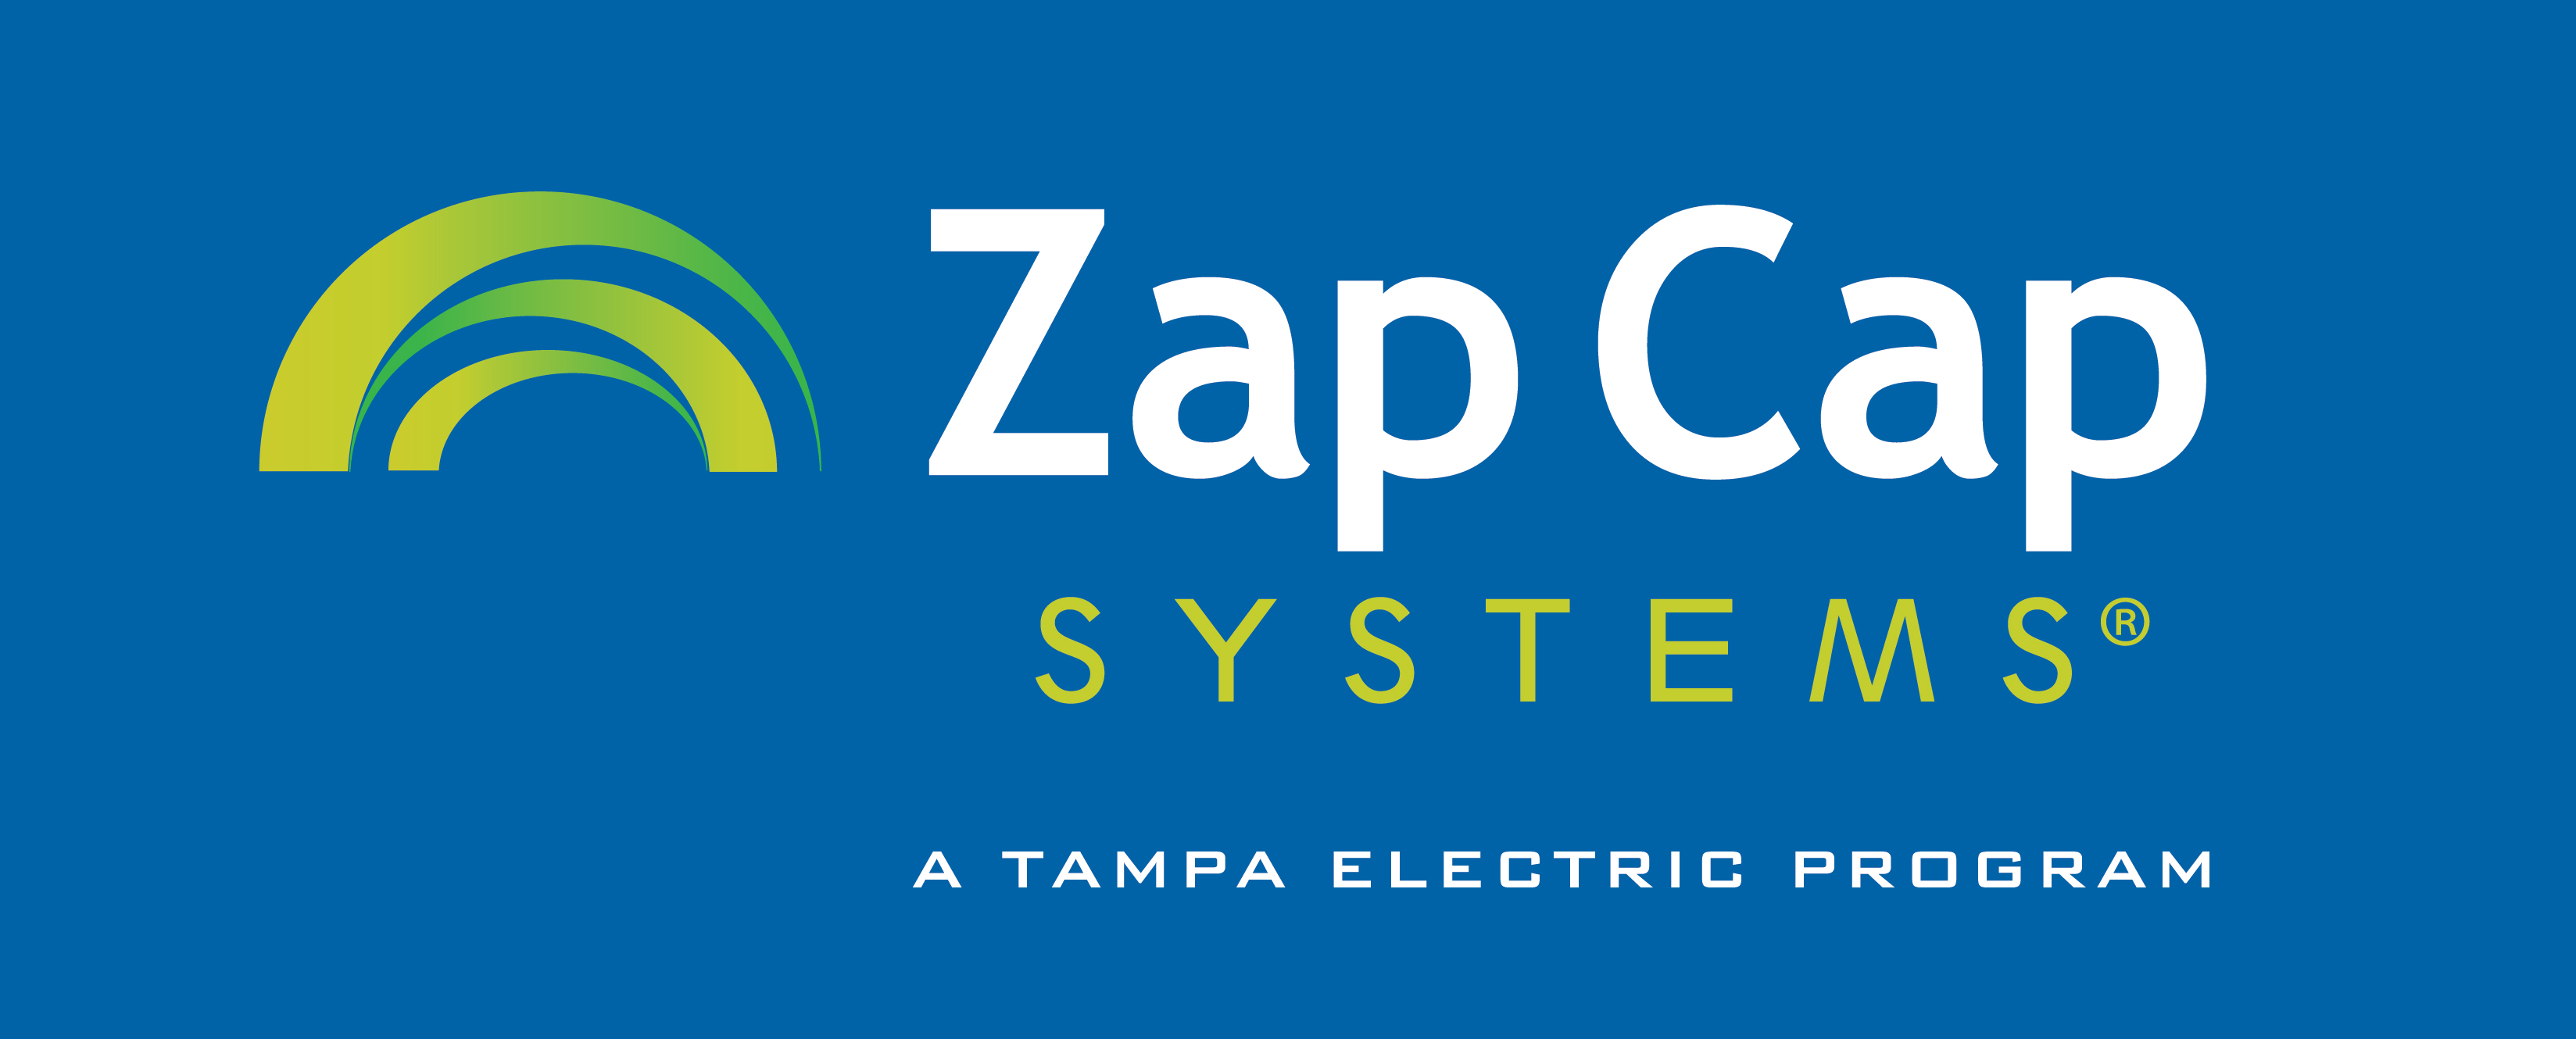 Tampa Electric Selects Brandmark Advertising to Produce Zap Cap TV and Radio Spots